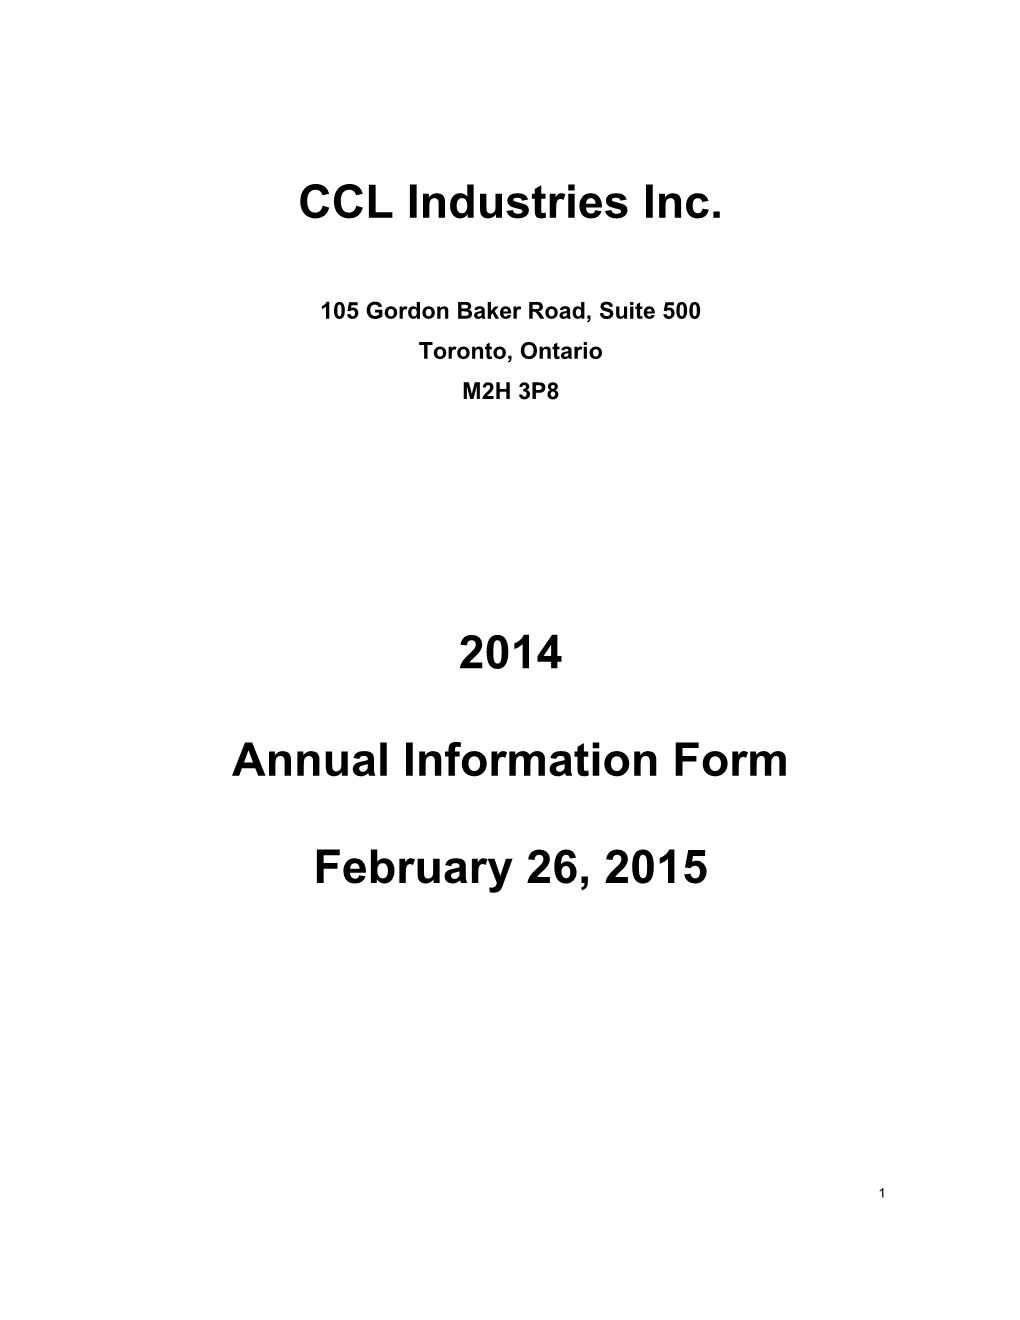 CCL Industries Inc. 2014 Annual Information Form February 26, 2015